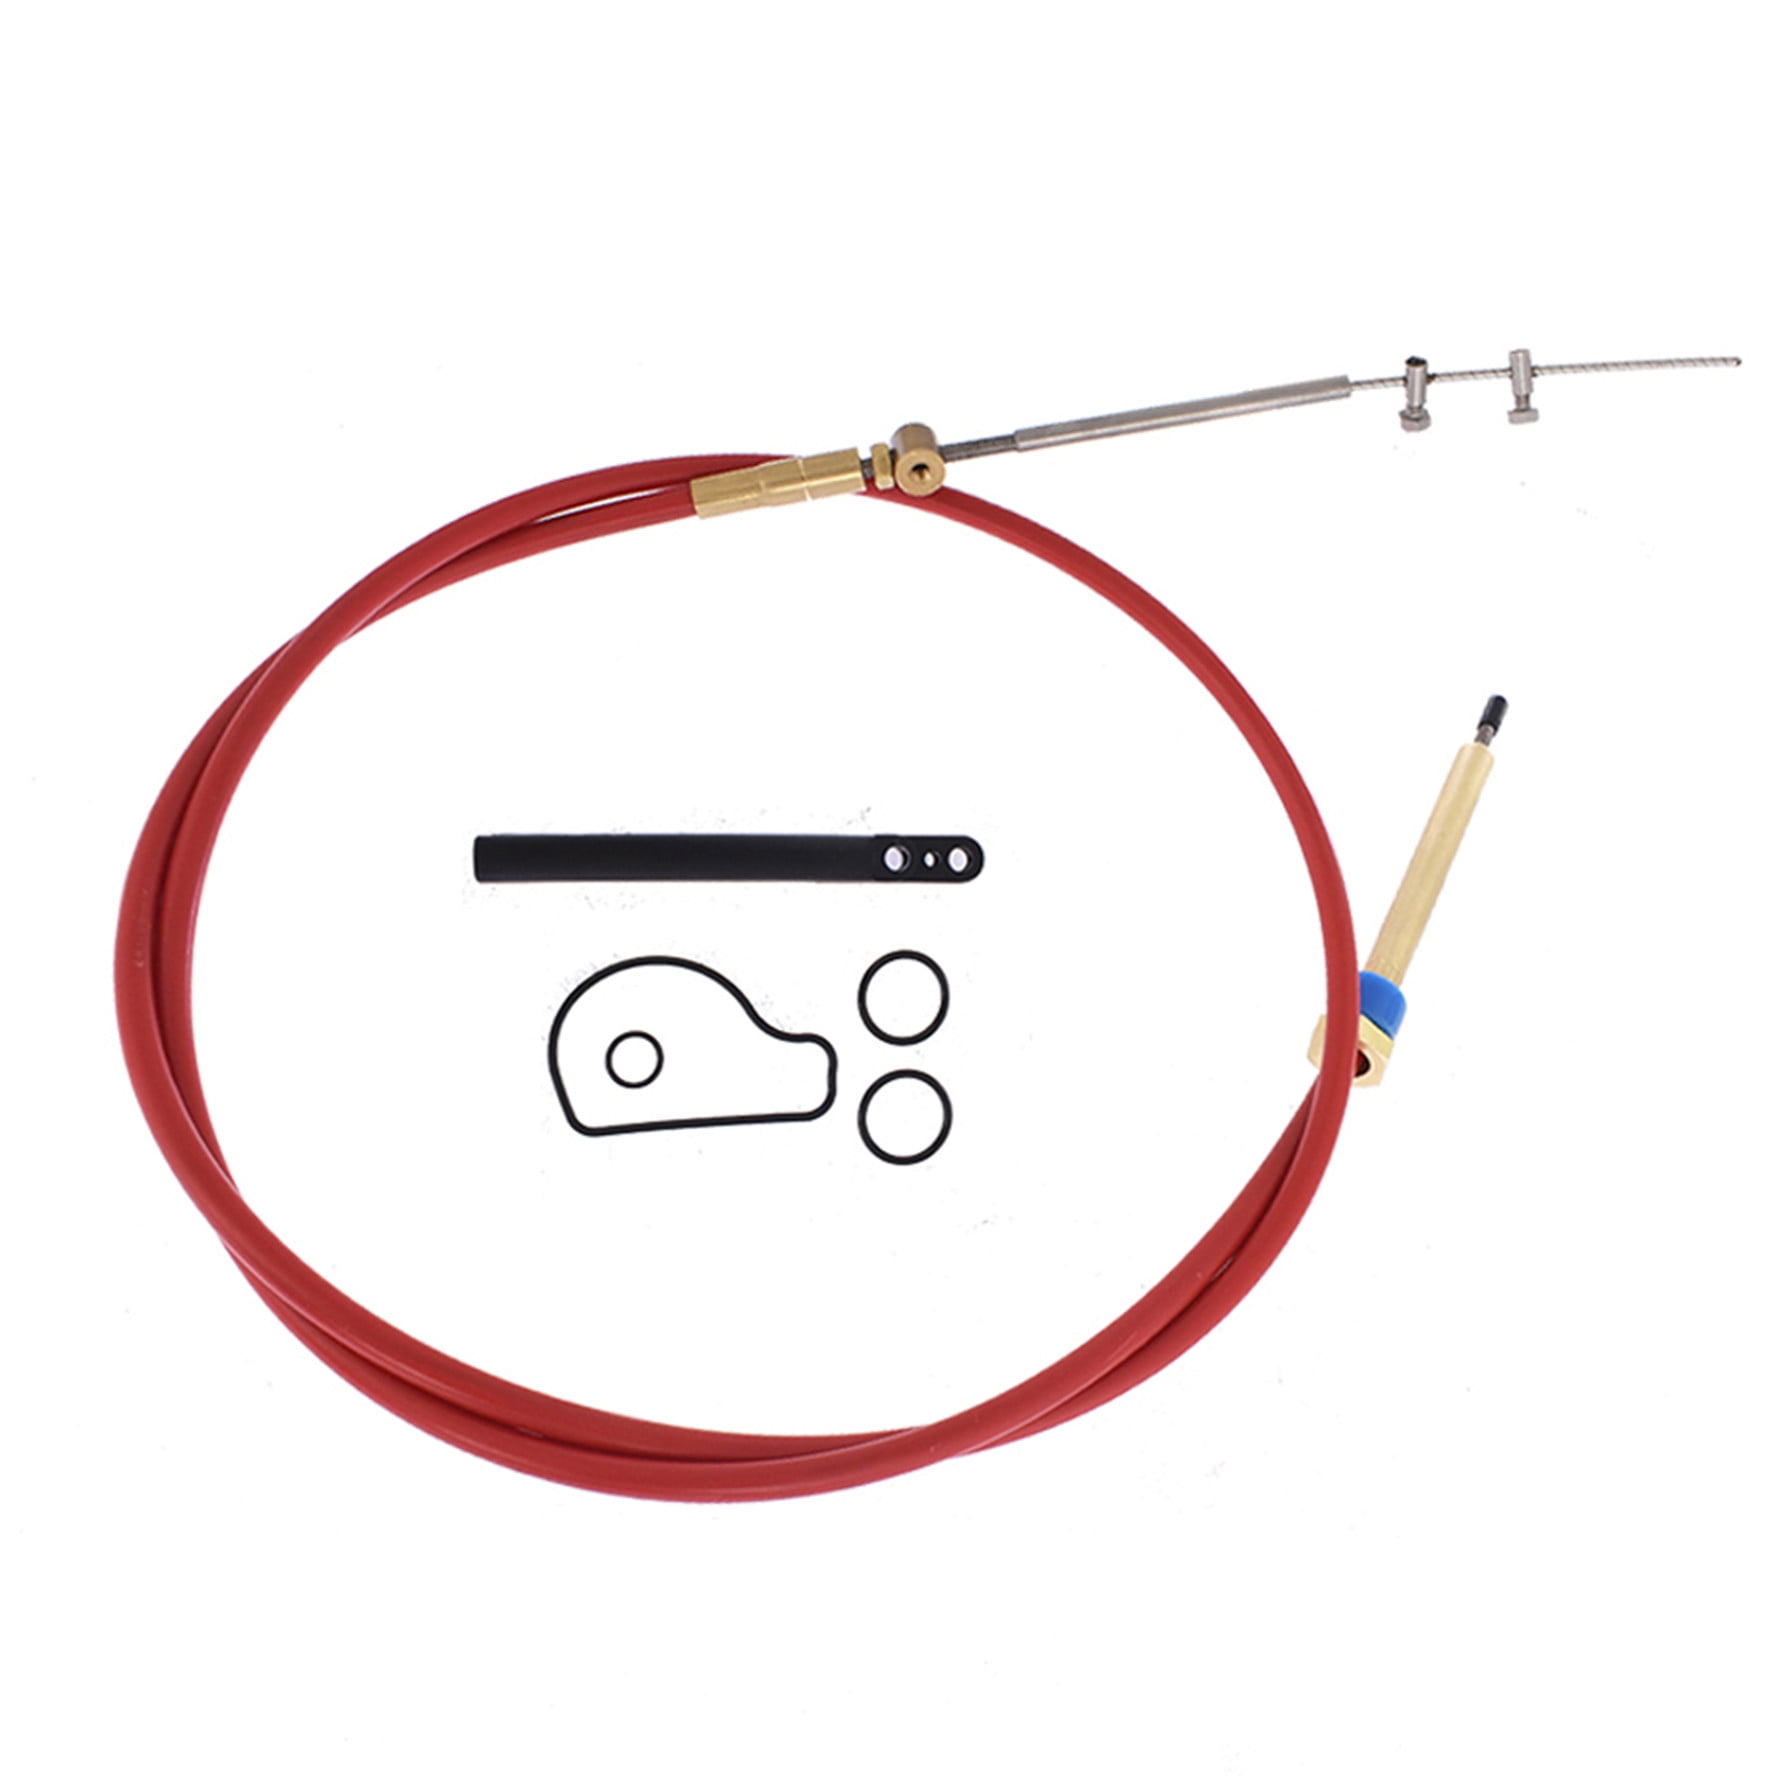 Lower Shift Cable Assembly kit for OMC Cobra Sterndrive Replaces 987661 gasket 